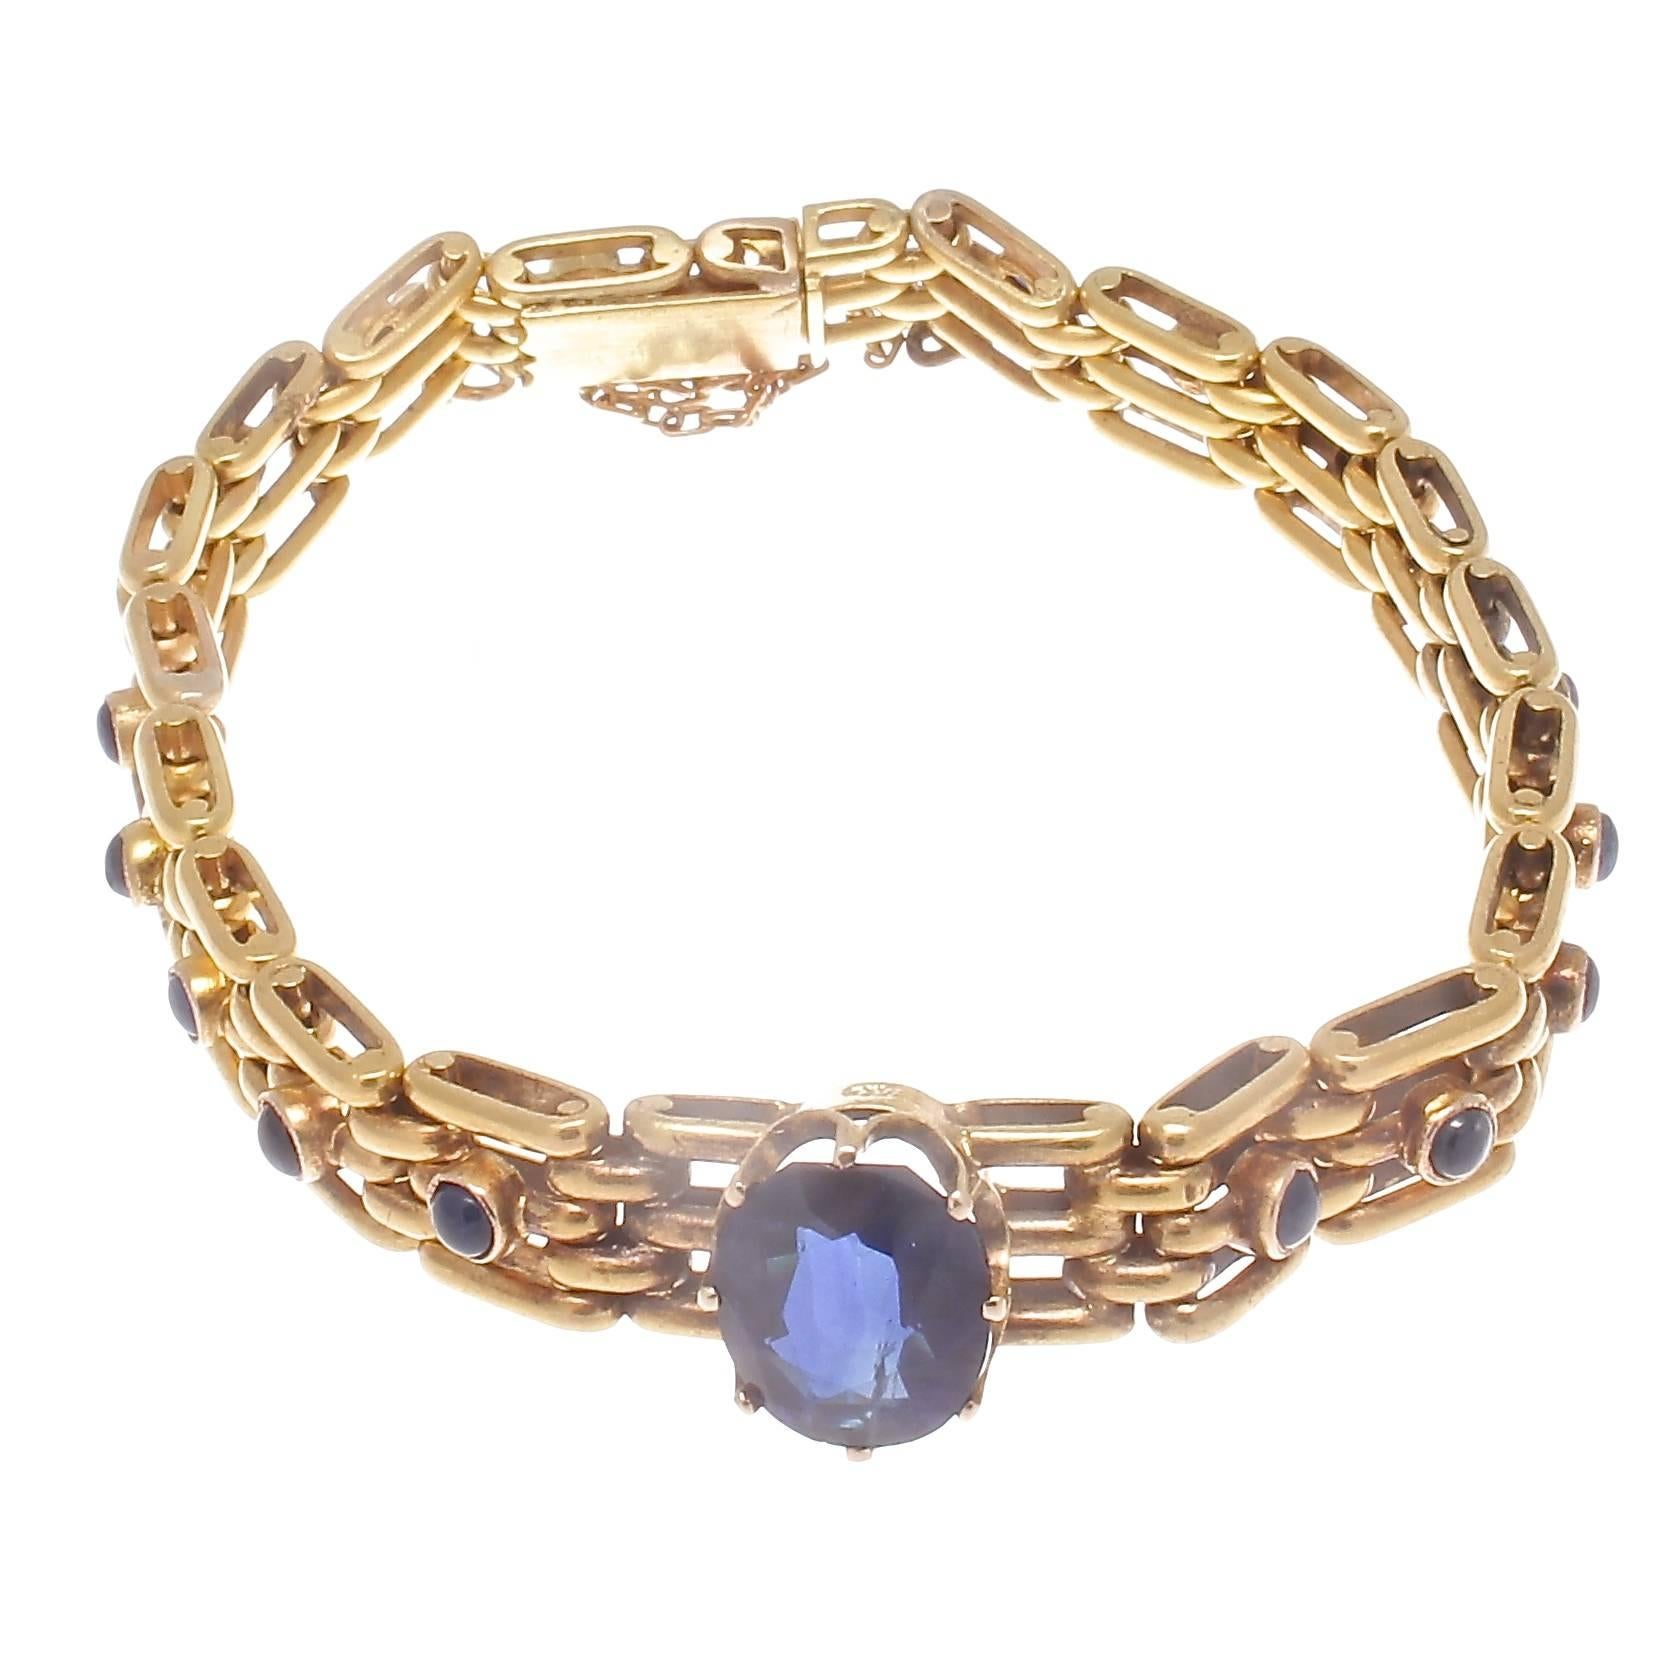 Inspired by the romantic period of the Victorian era when jewelry was vibrant and colorful, resembling the true love the Queen had for the King. Featuring an approximately 3 carat oval cut navy blue sapphire mounted amidst links of glistening 18k